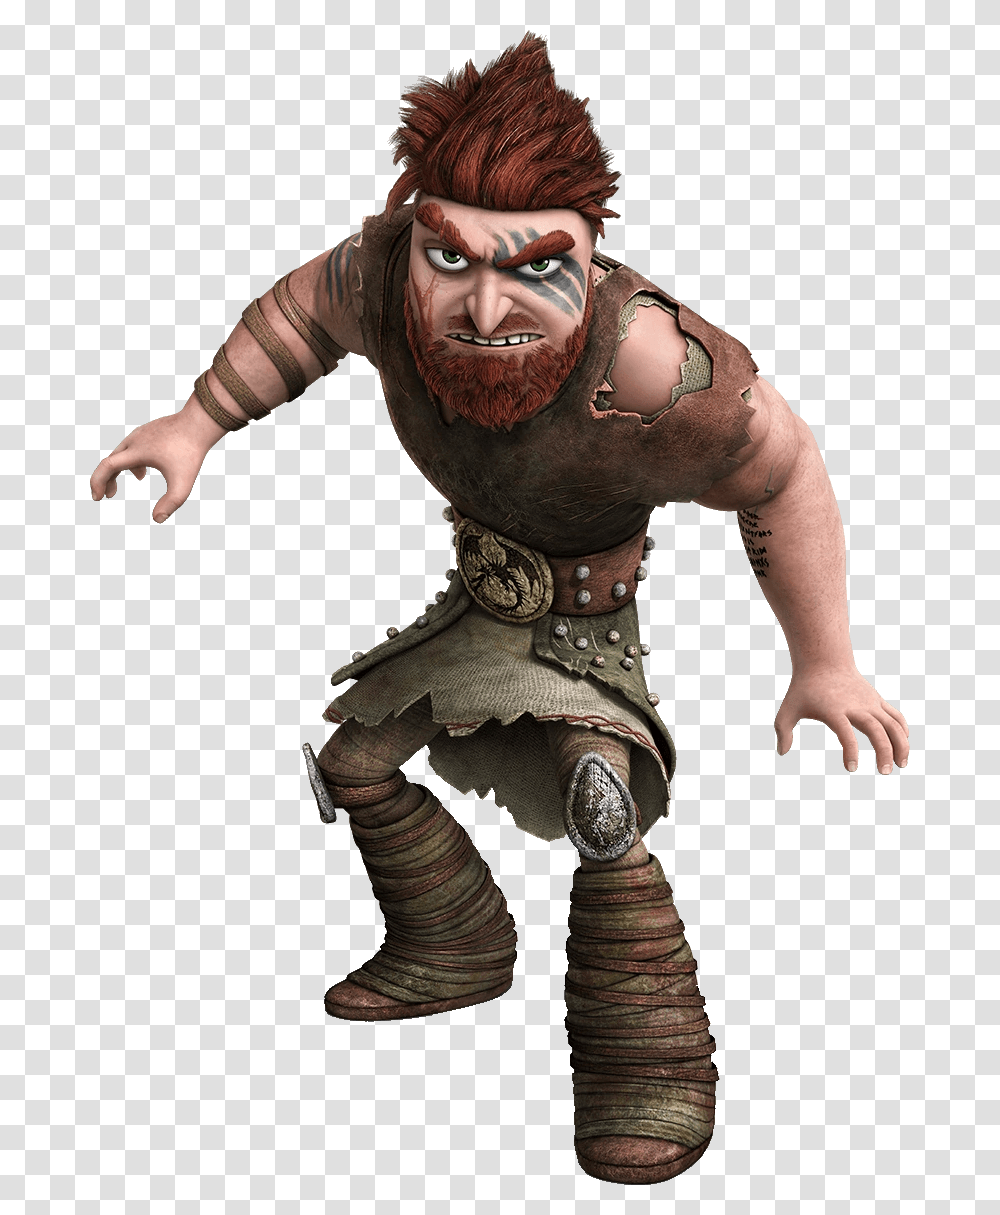 How To Train Your Dragon Wiki Train Your Dragon Dagur, Person, Human, Toy, Figurine Transparent Png